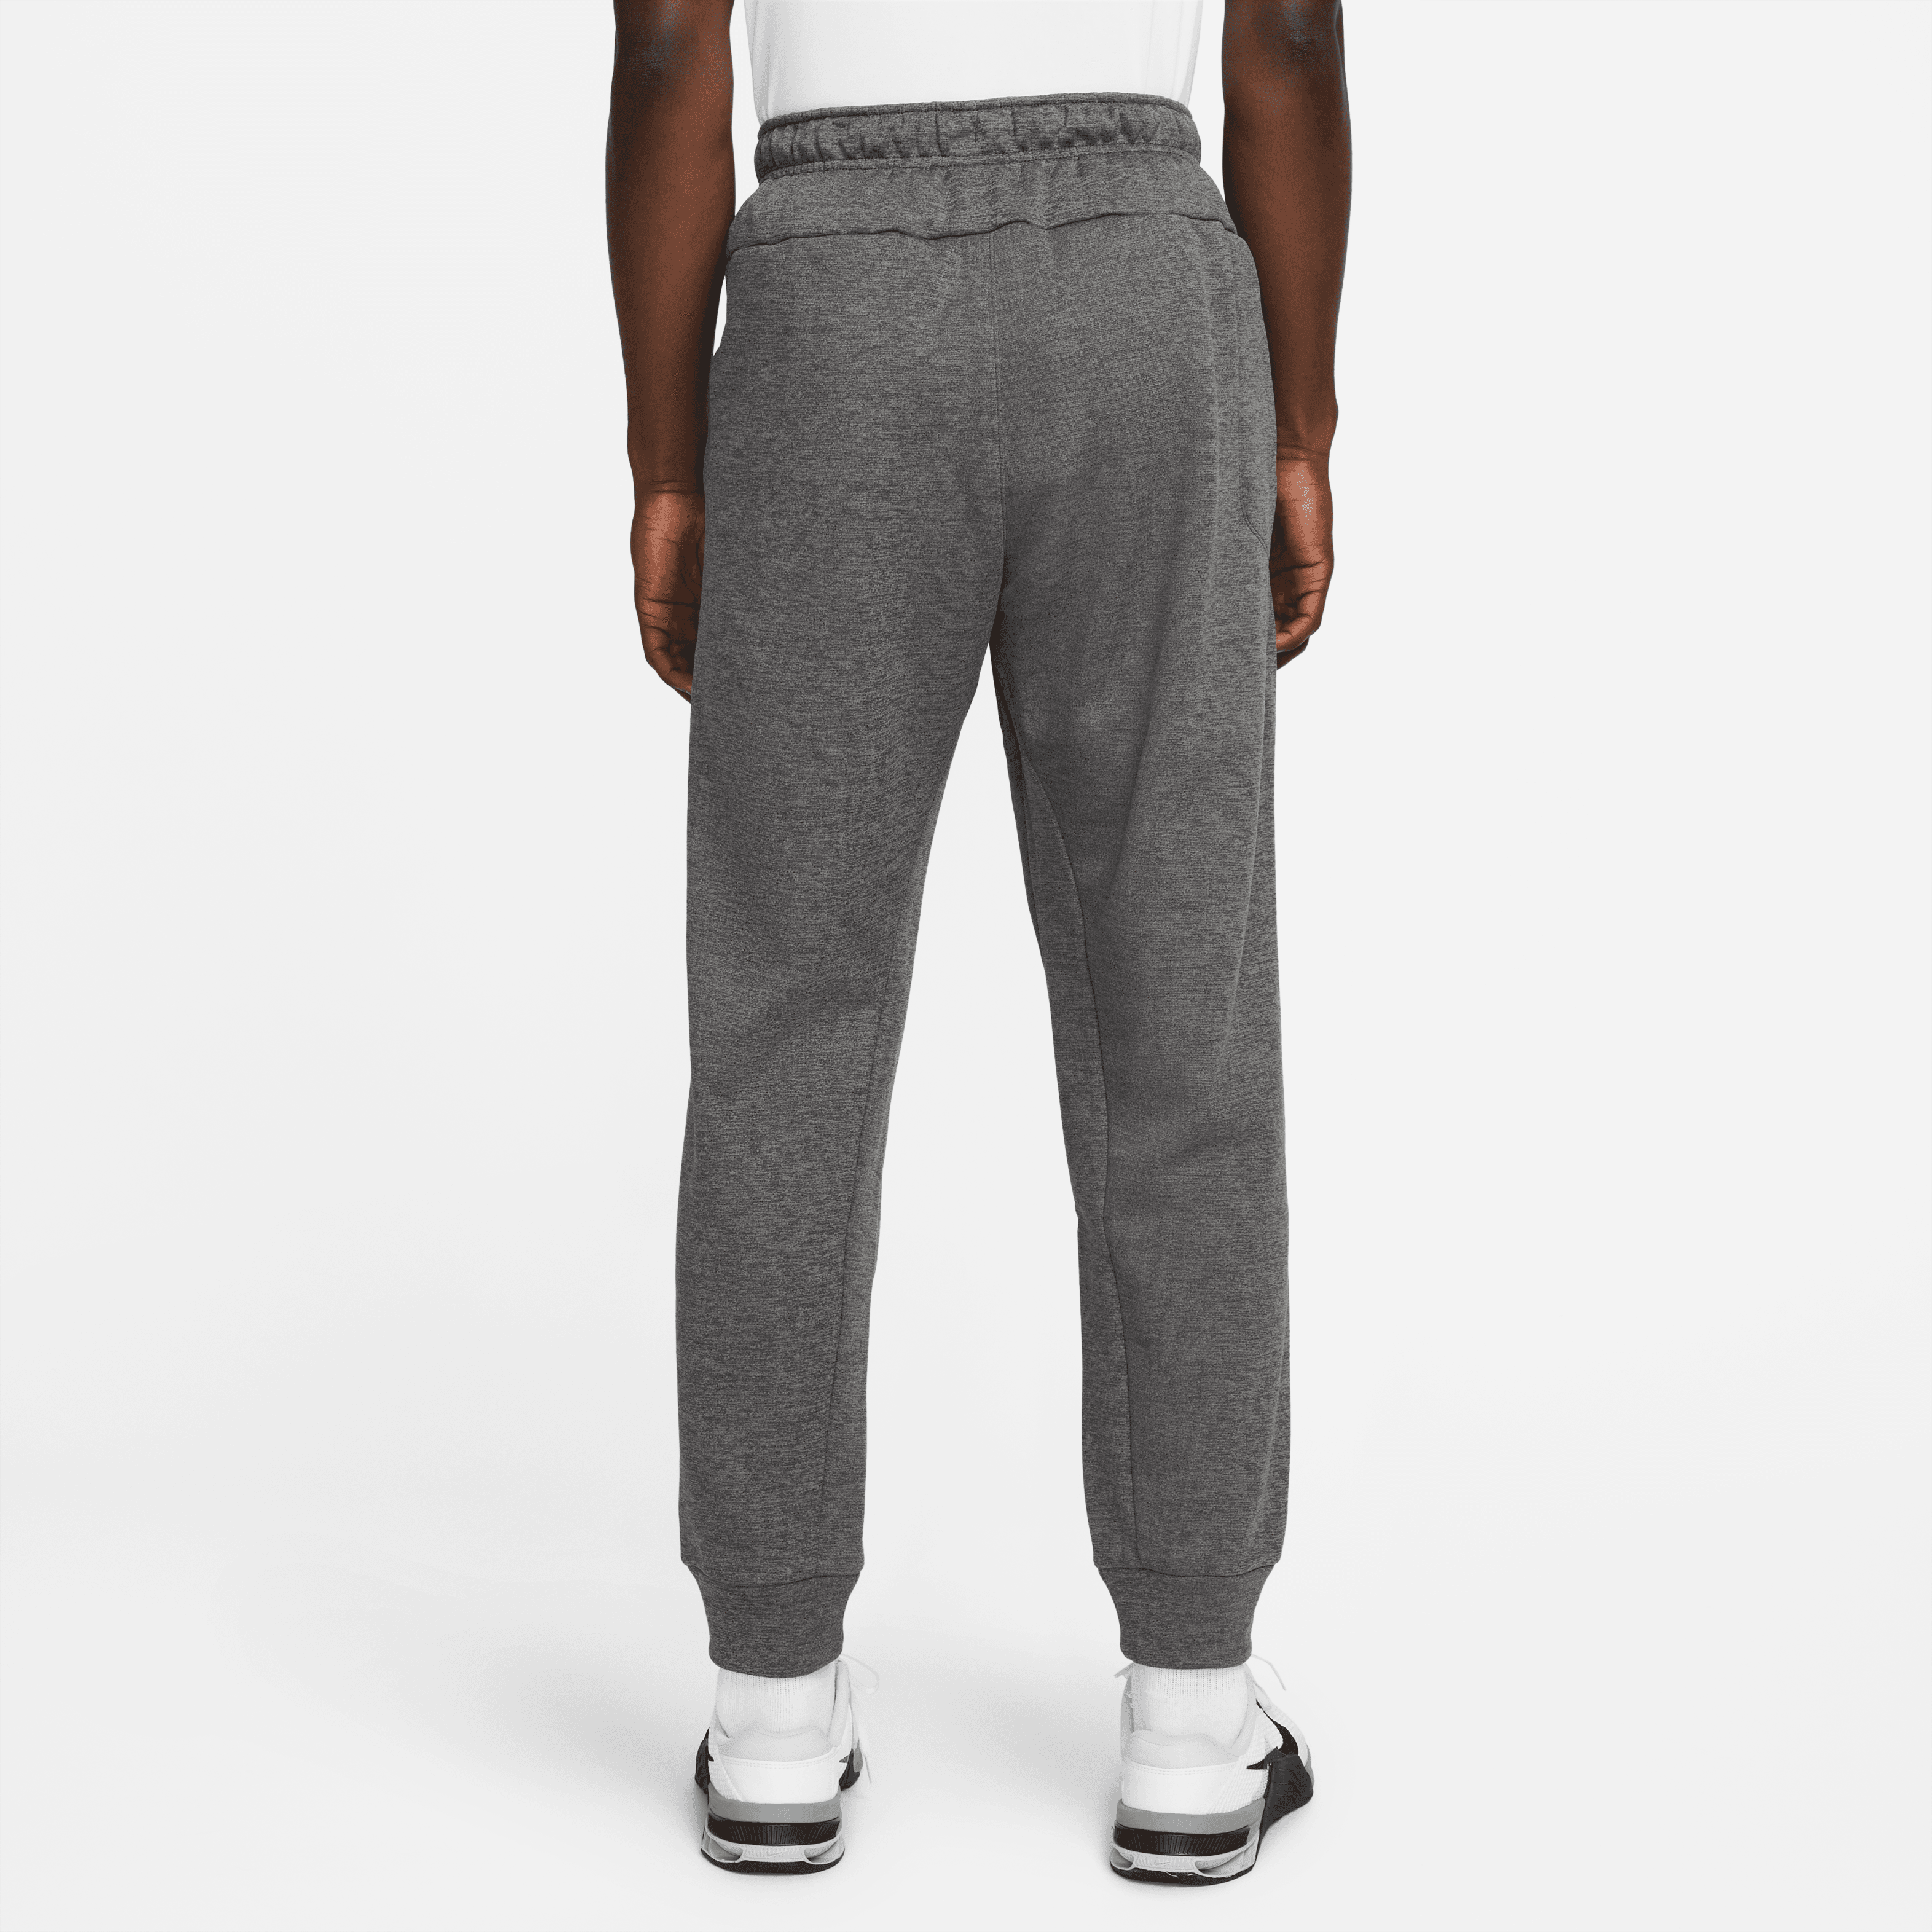 Nike Men's Therma-FIT Tapered Fitness Pants